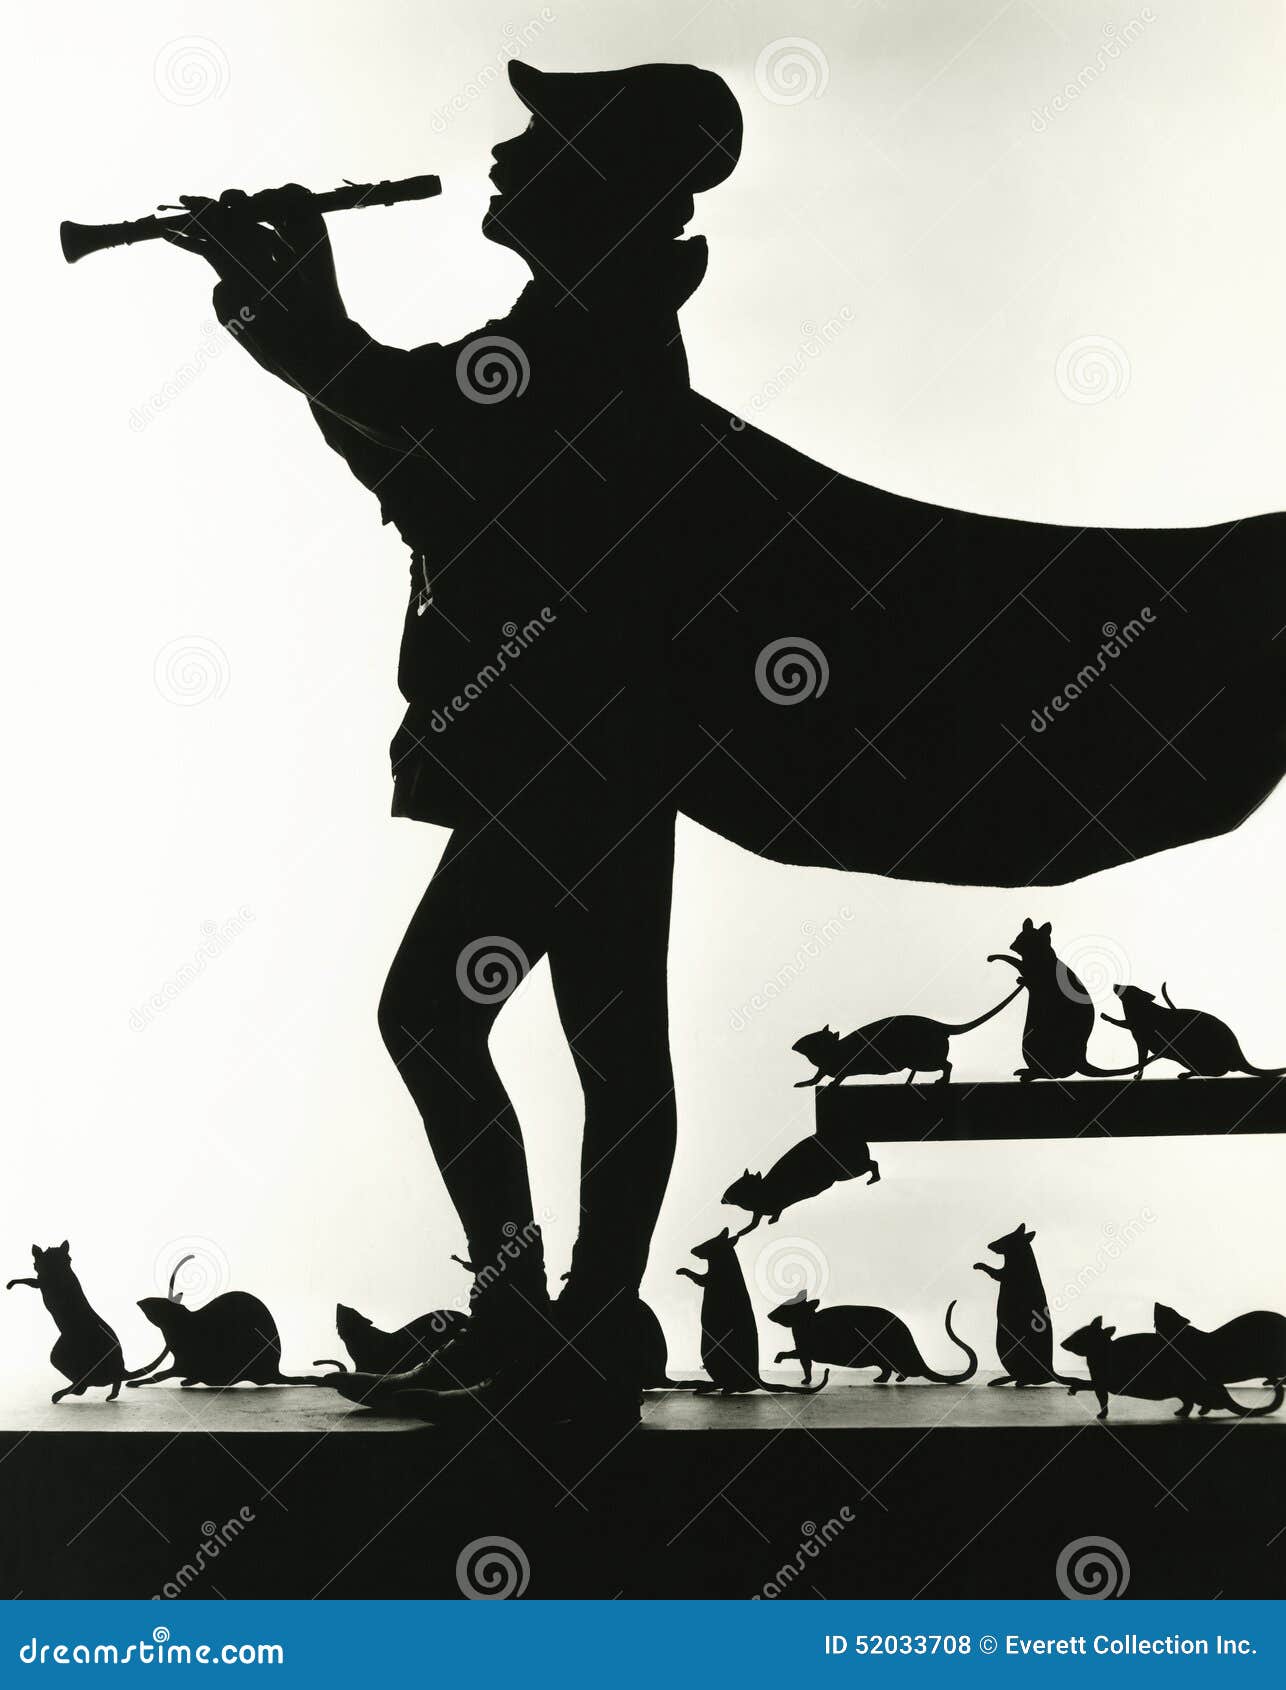 silhouette of pied piper followed by rats